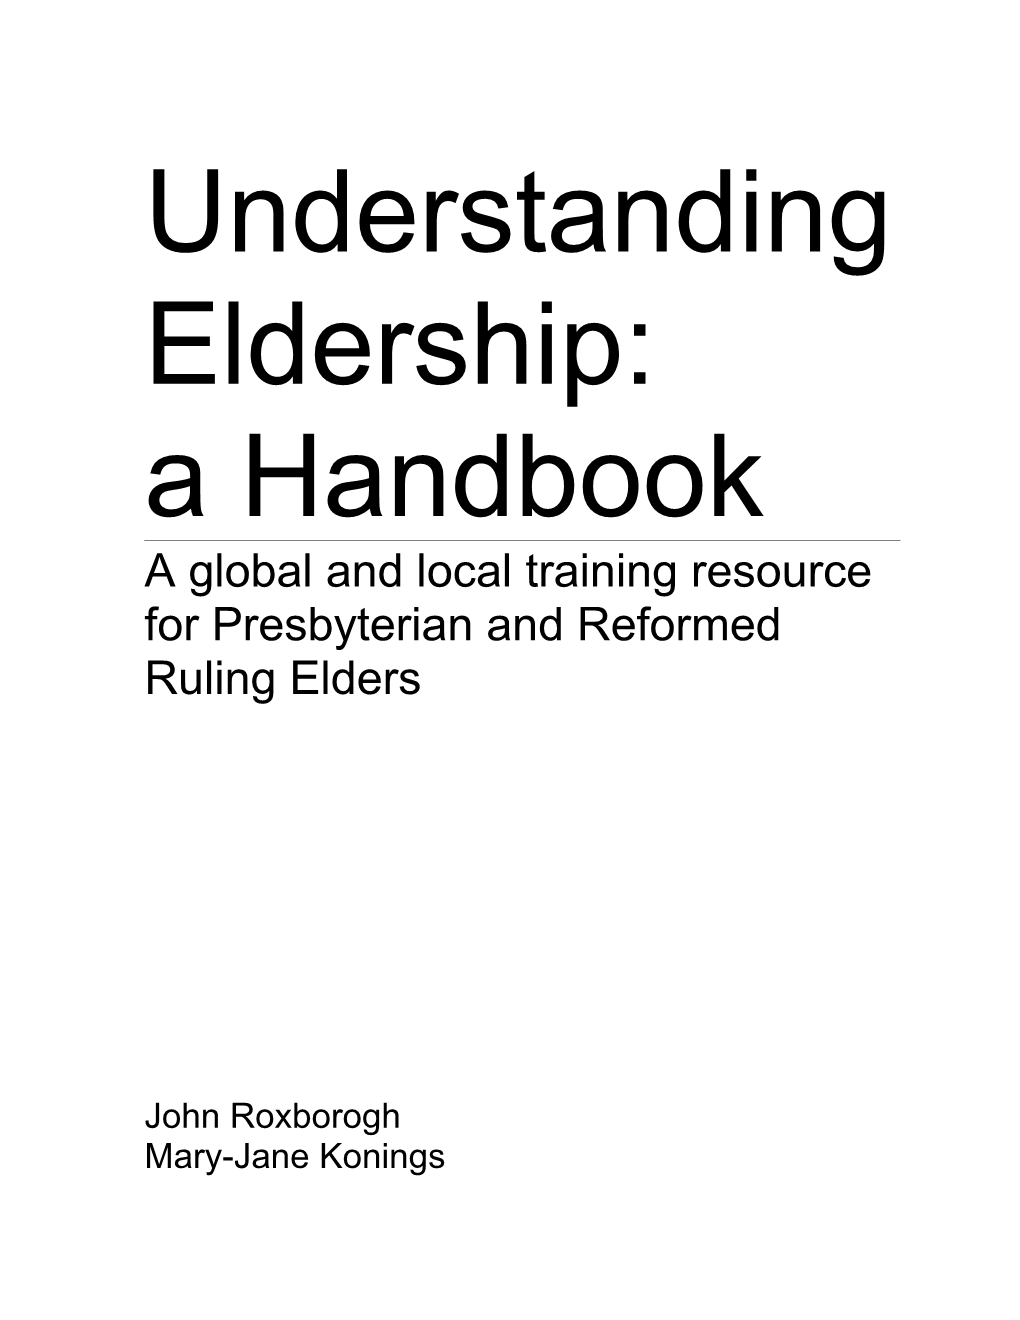 A Global and Local Training Resource for Presbyterian and Reformed Ruling Elders